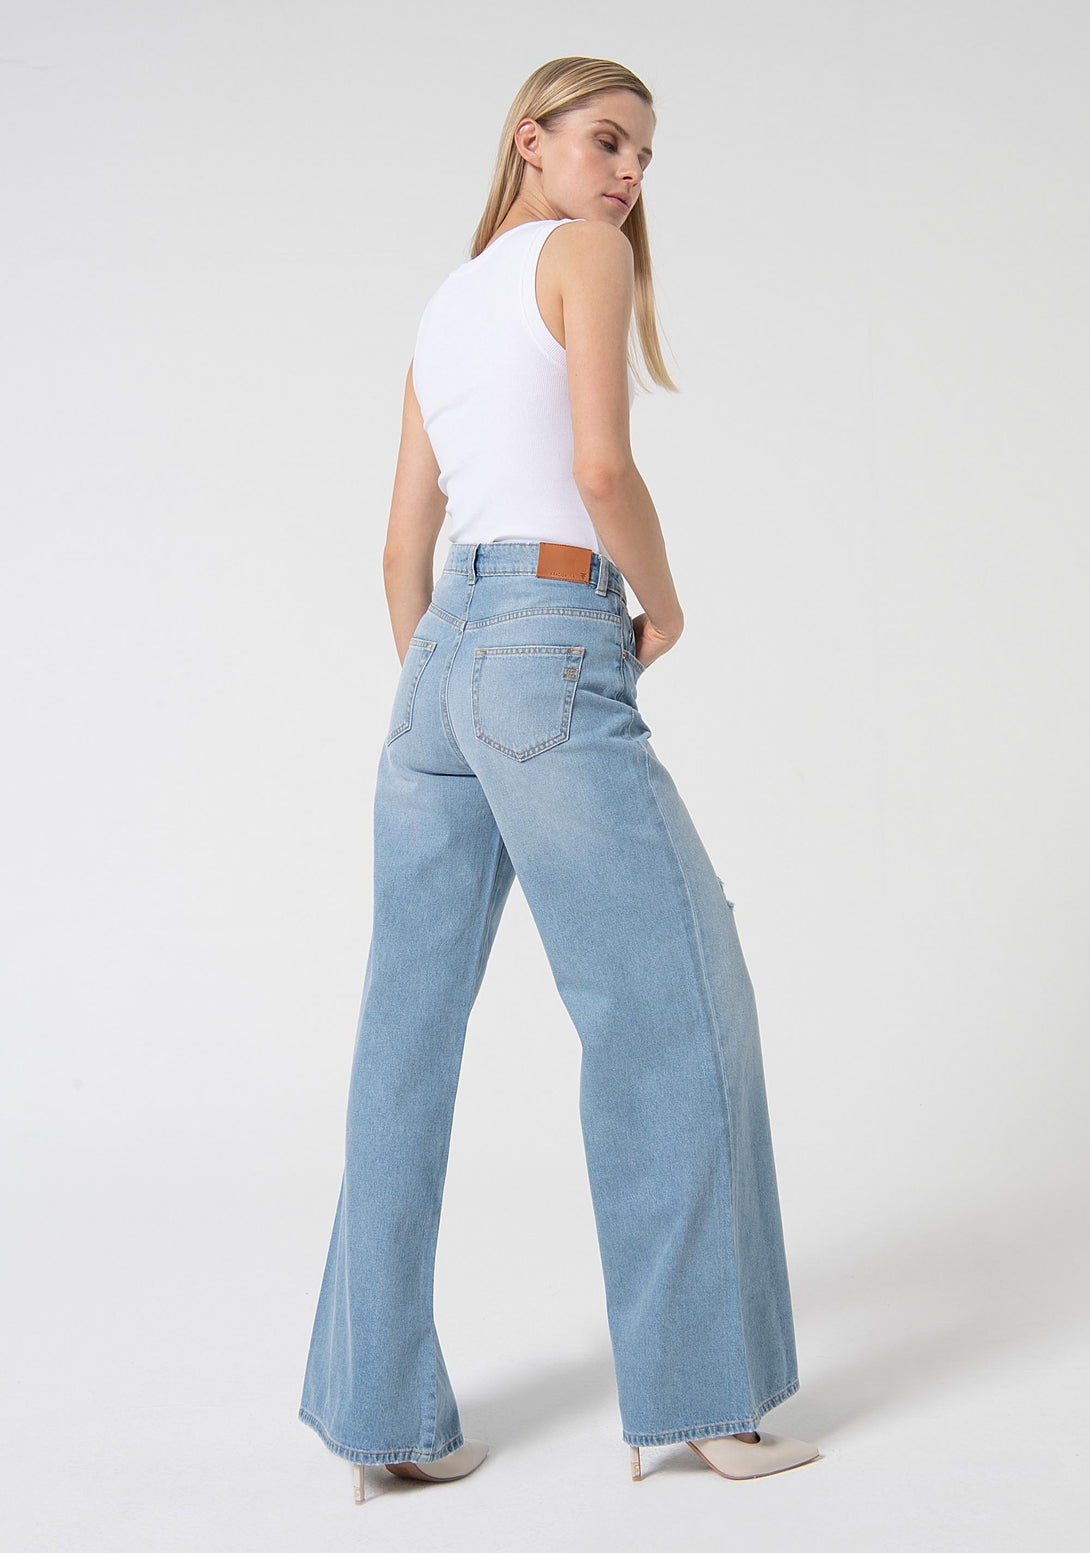 Jeans wide leg made in denim with bleached light wash Fracomina FP24SV3015D41903-062-3